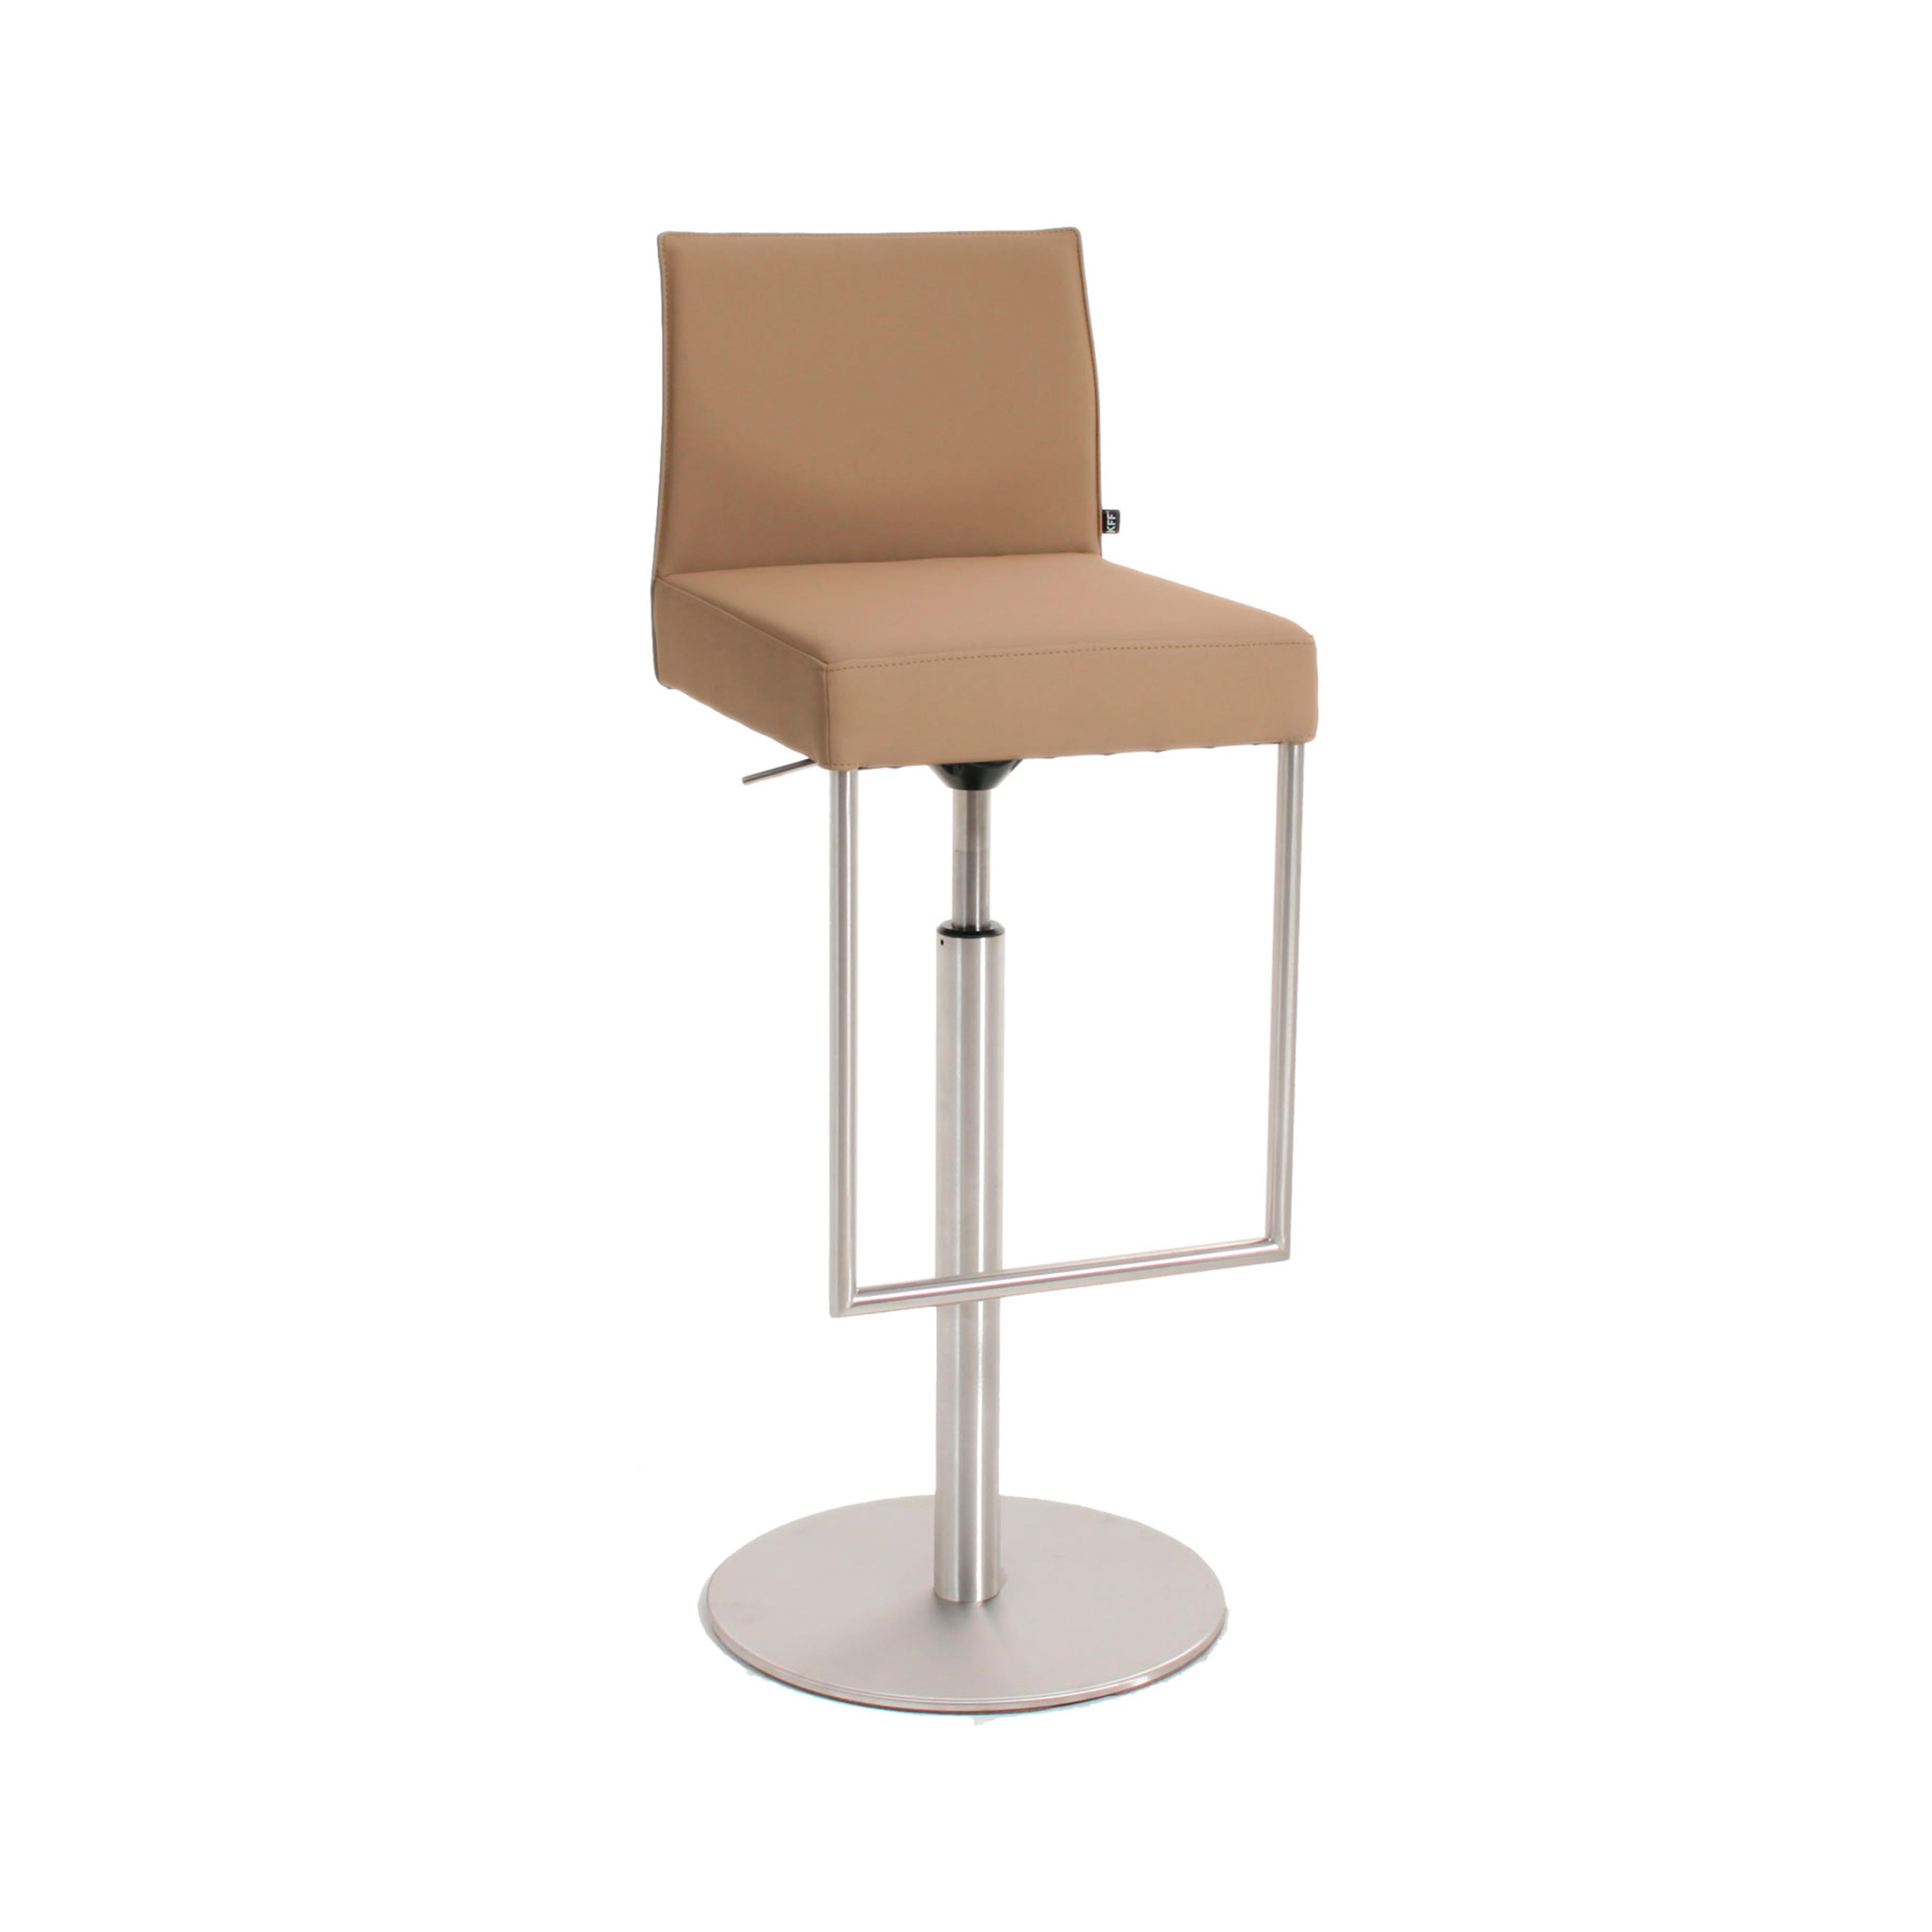 GLOOH Tall Bar Stool with Cantilever in Beige Leather by KFF For Sale